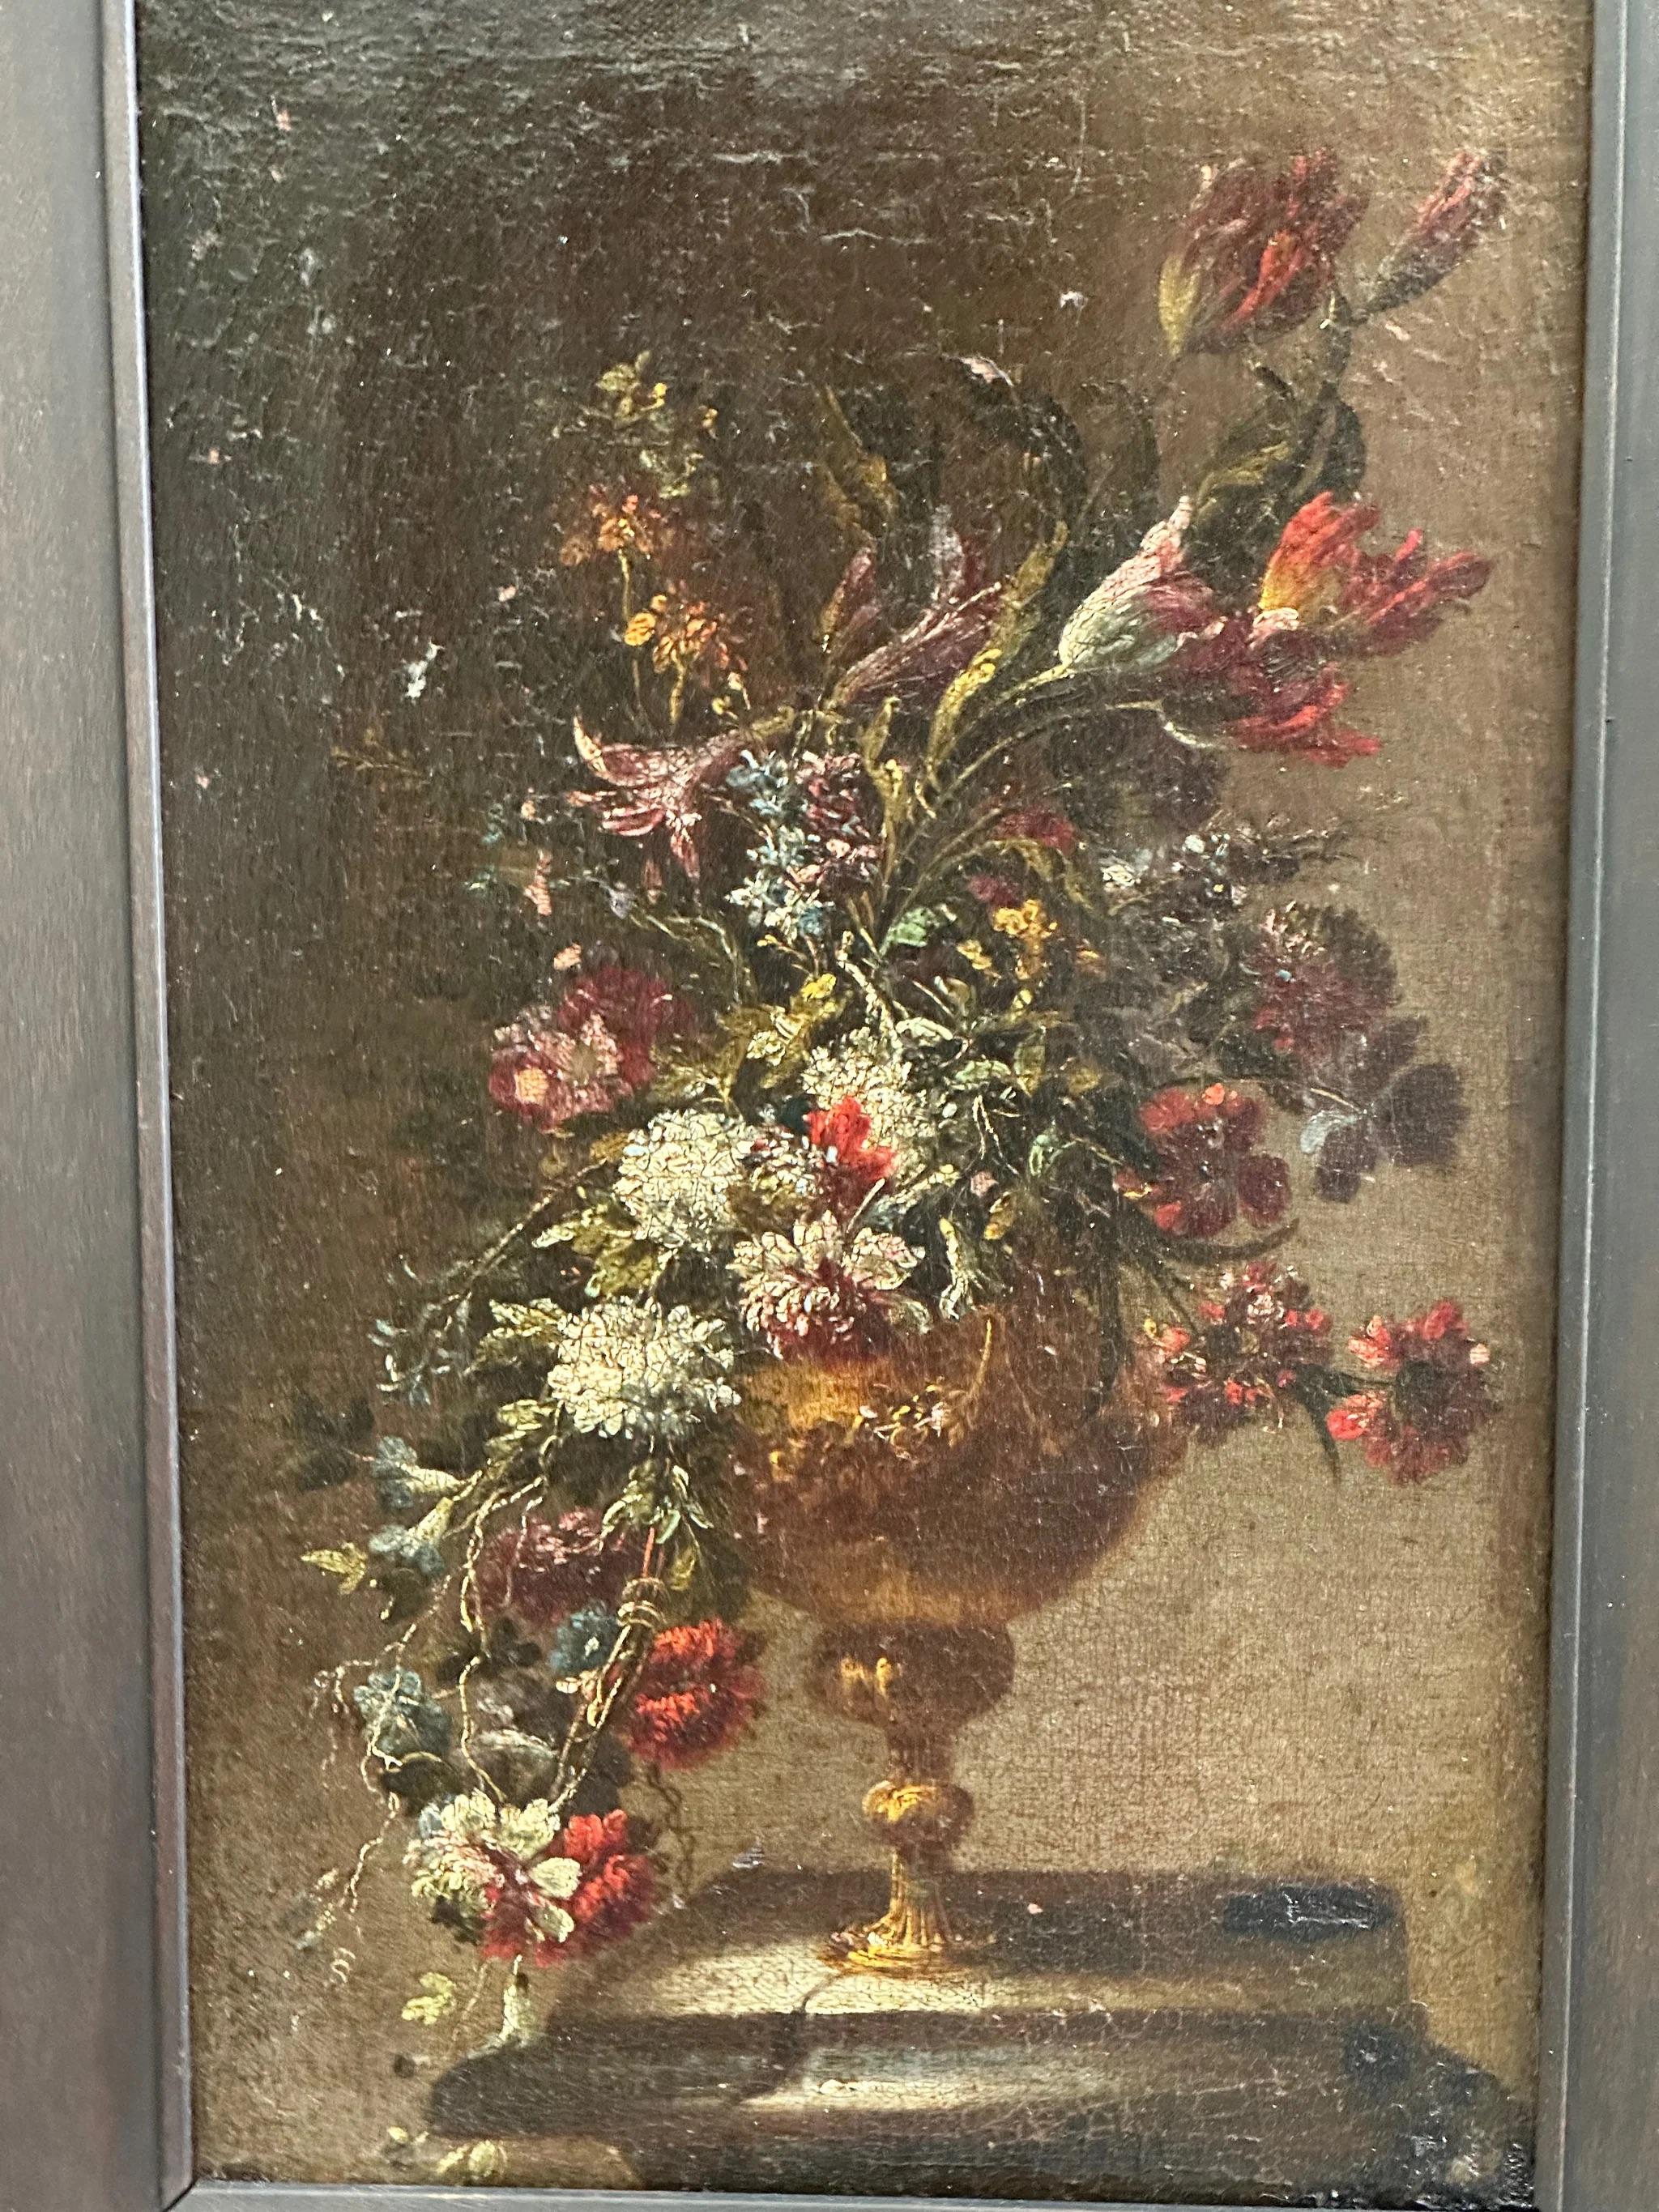 Seventeenth Century Old Master still life, well-detailed, no obvious signature. Oil on canvas. Dimensions: (Frame) H 19.25